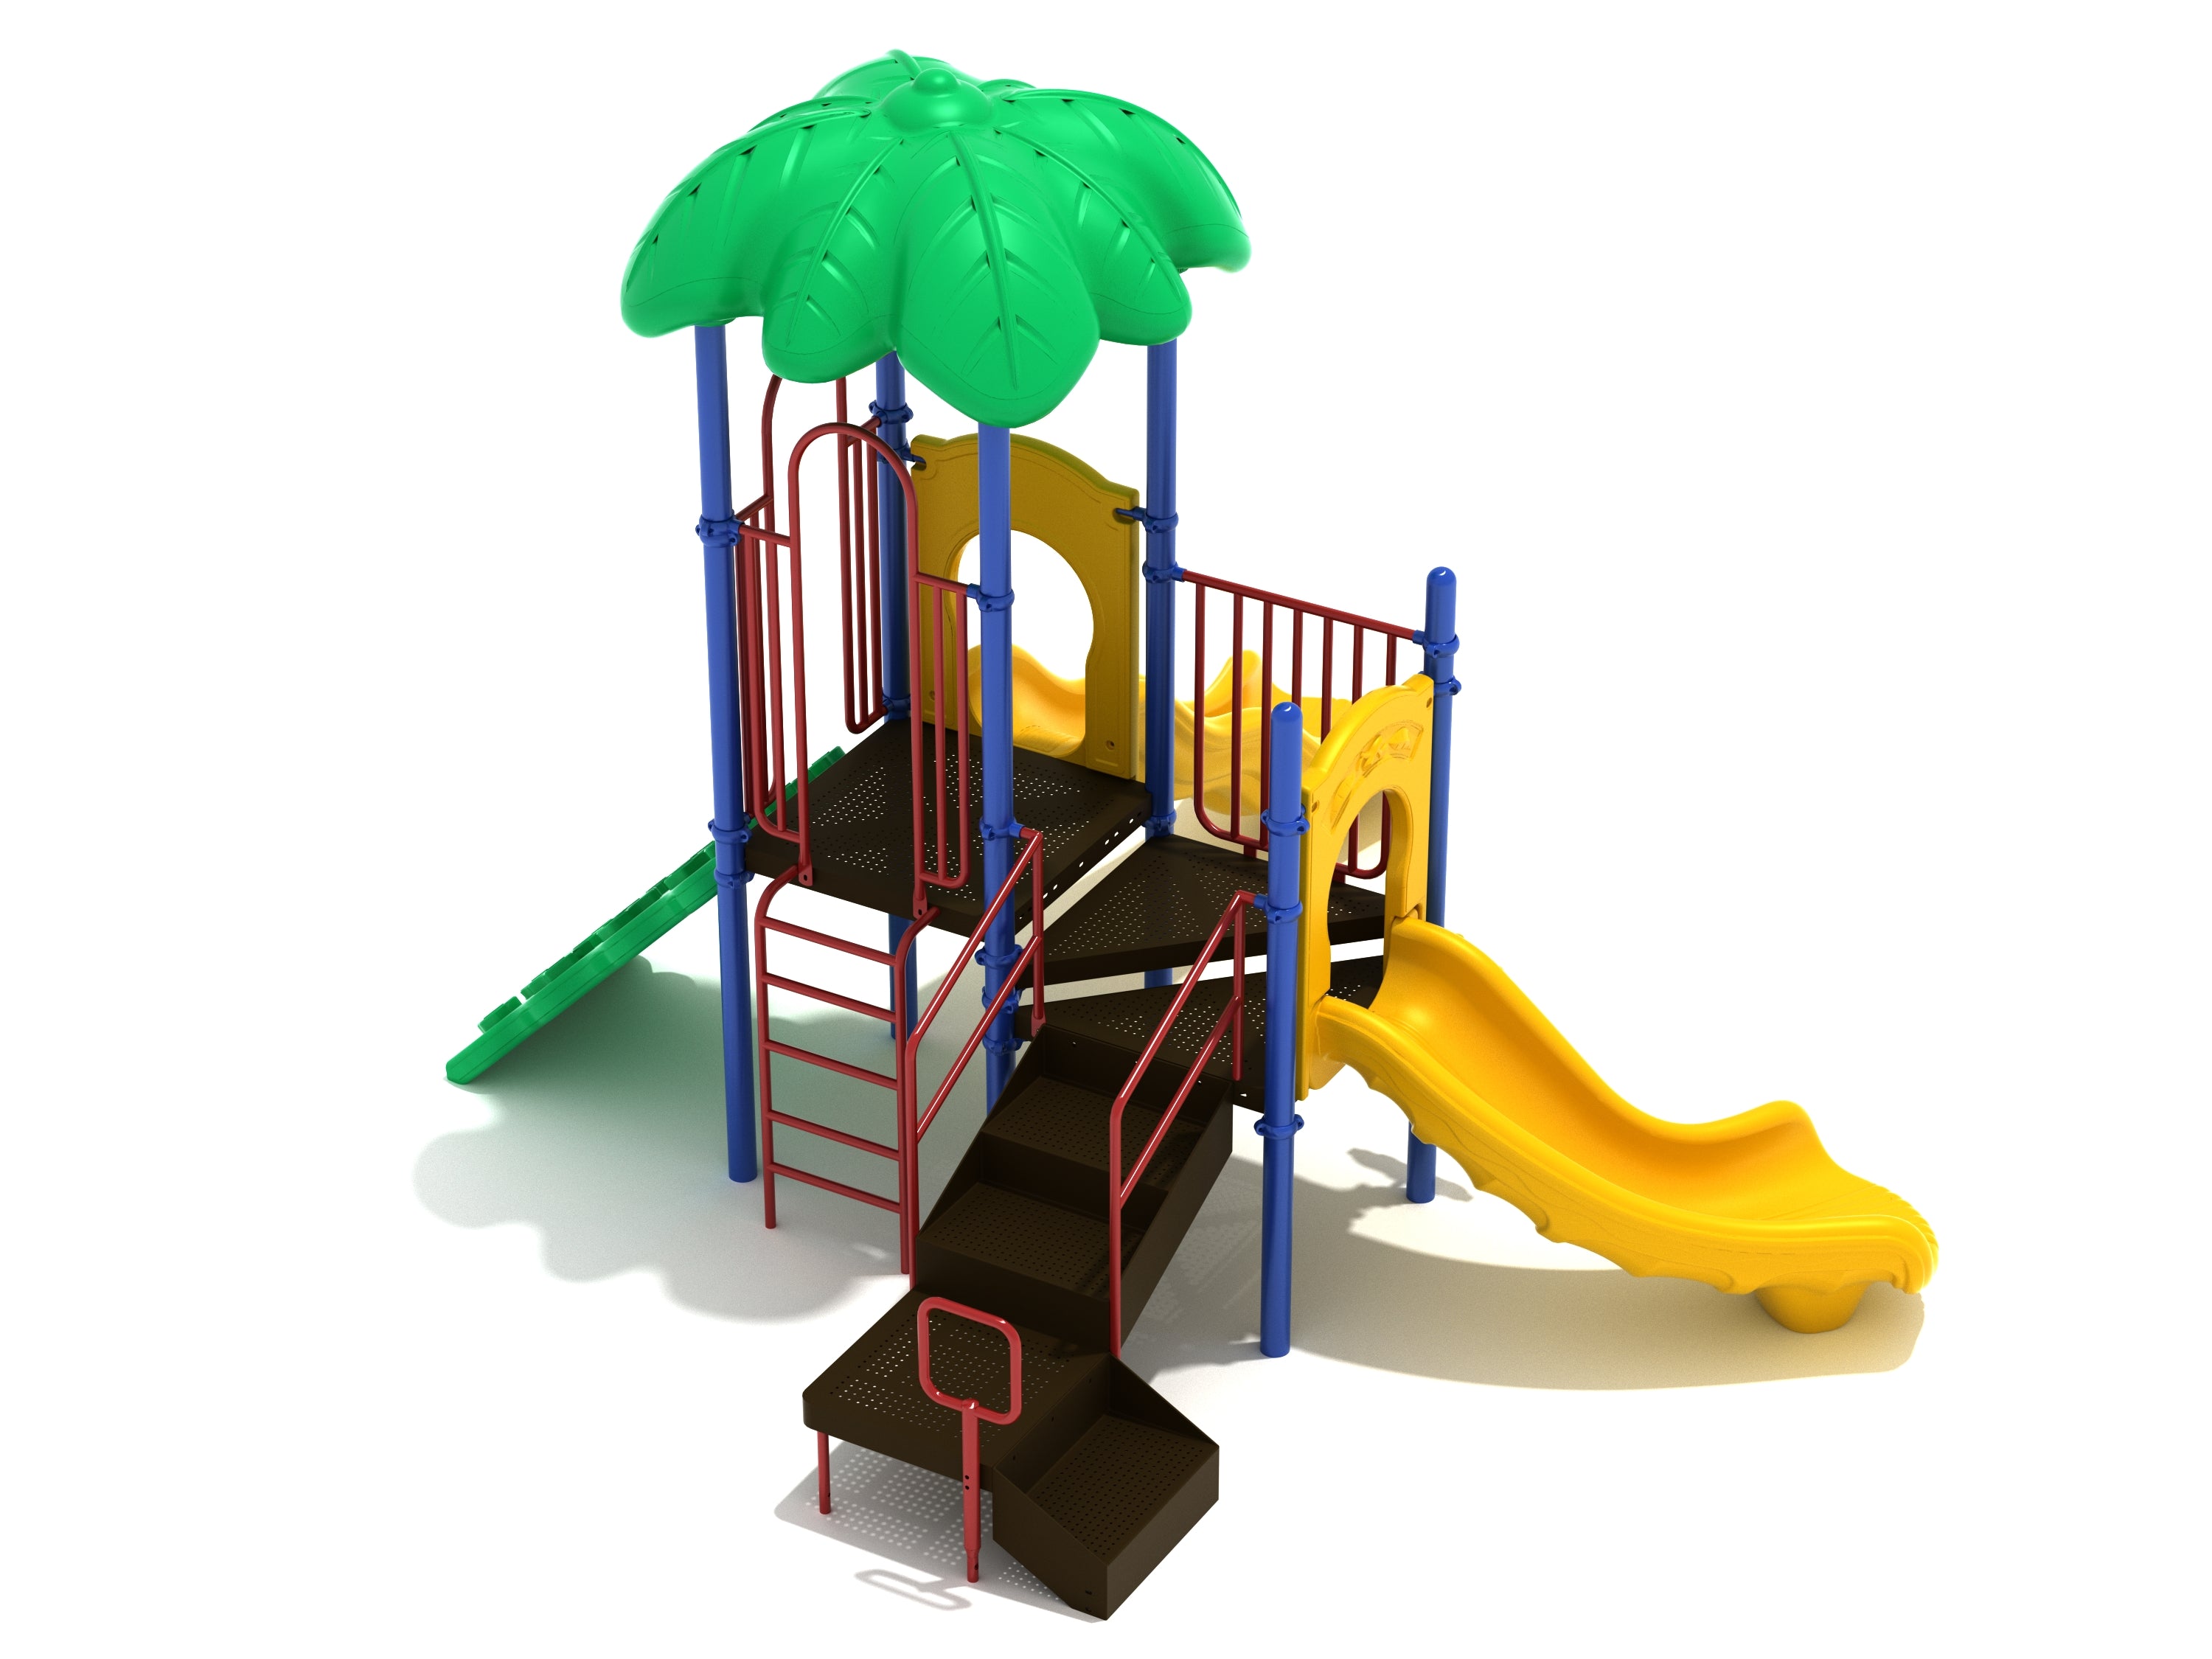 Village Greens Play System Primary Colors